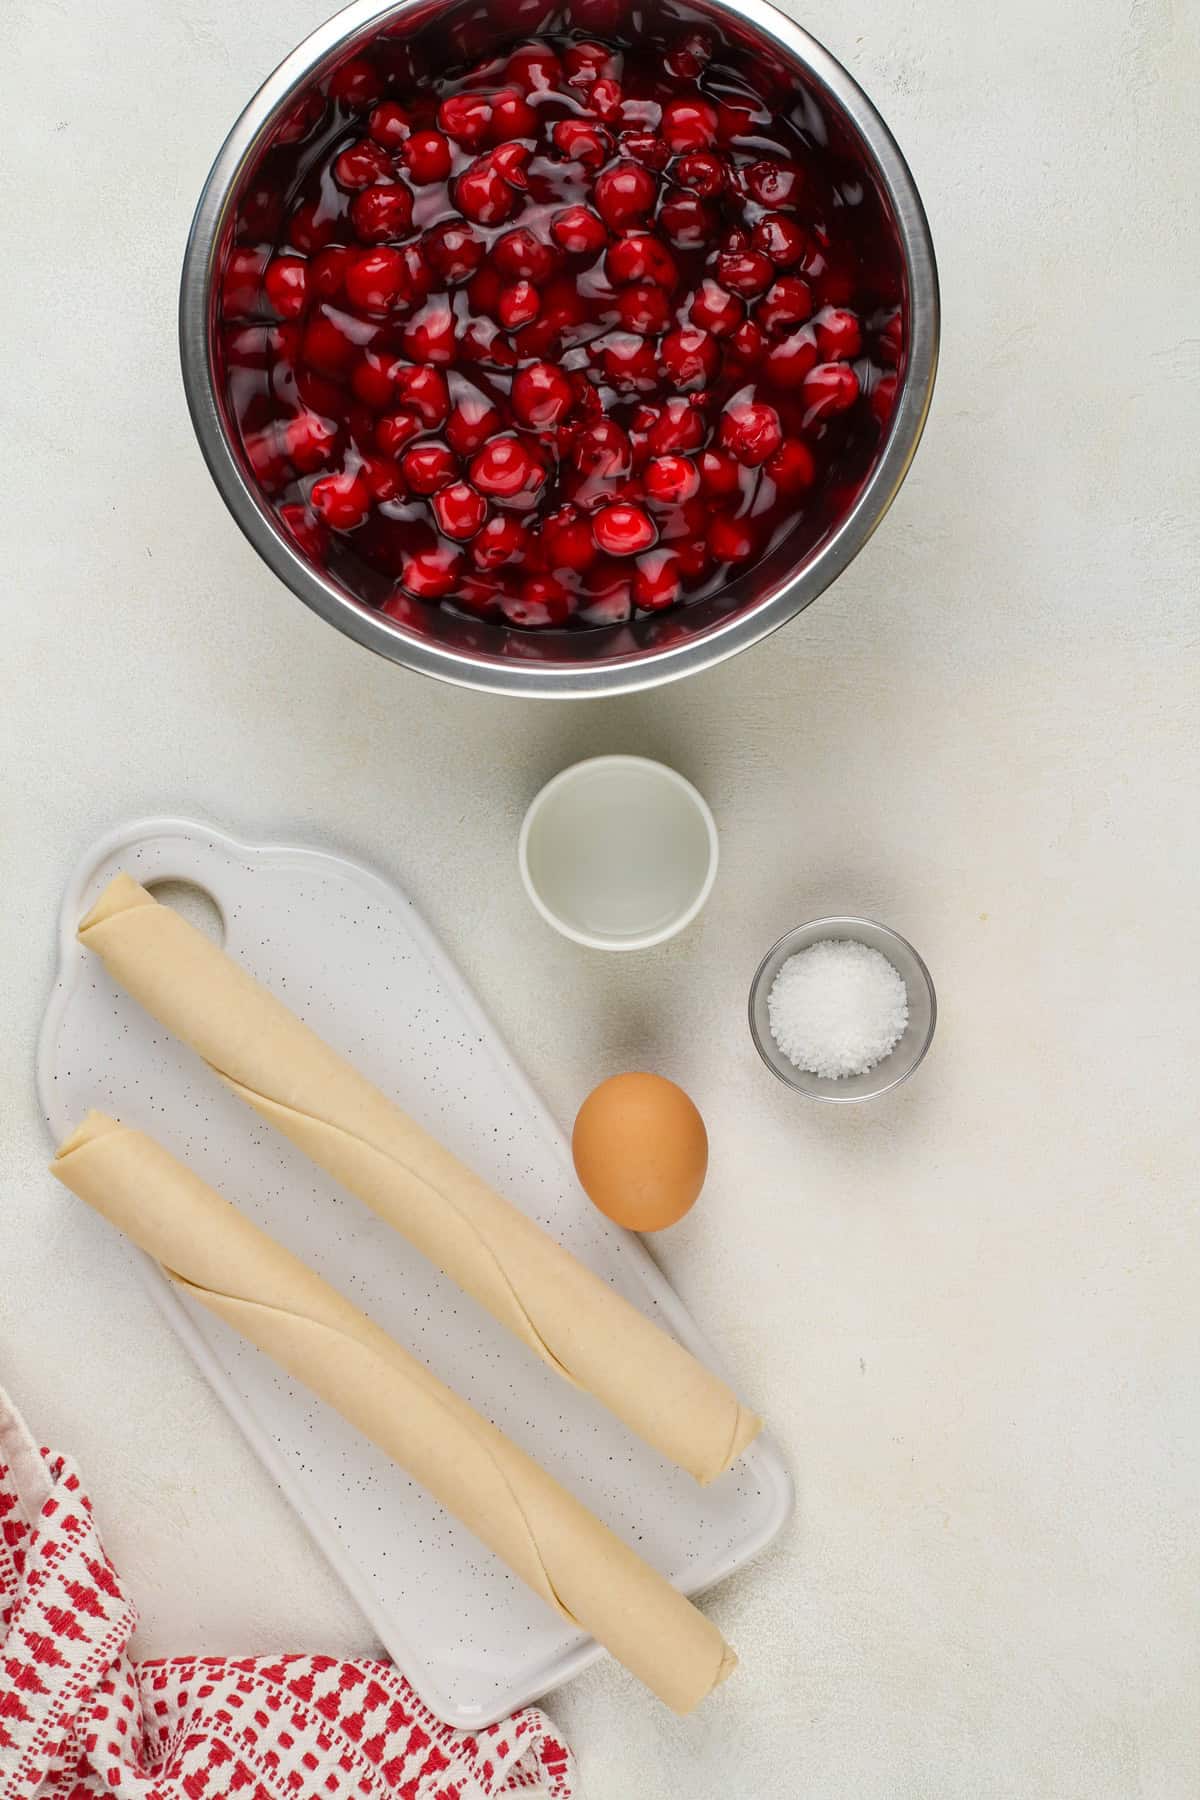 Ingredients for sour cherry pie arranged on a beige countertop.